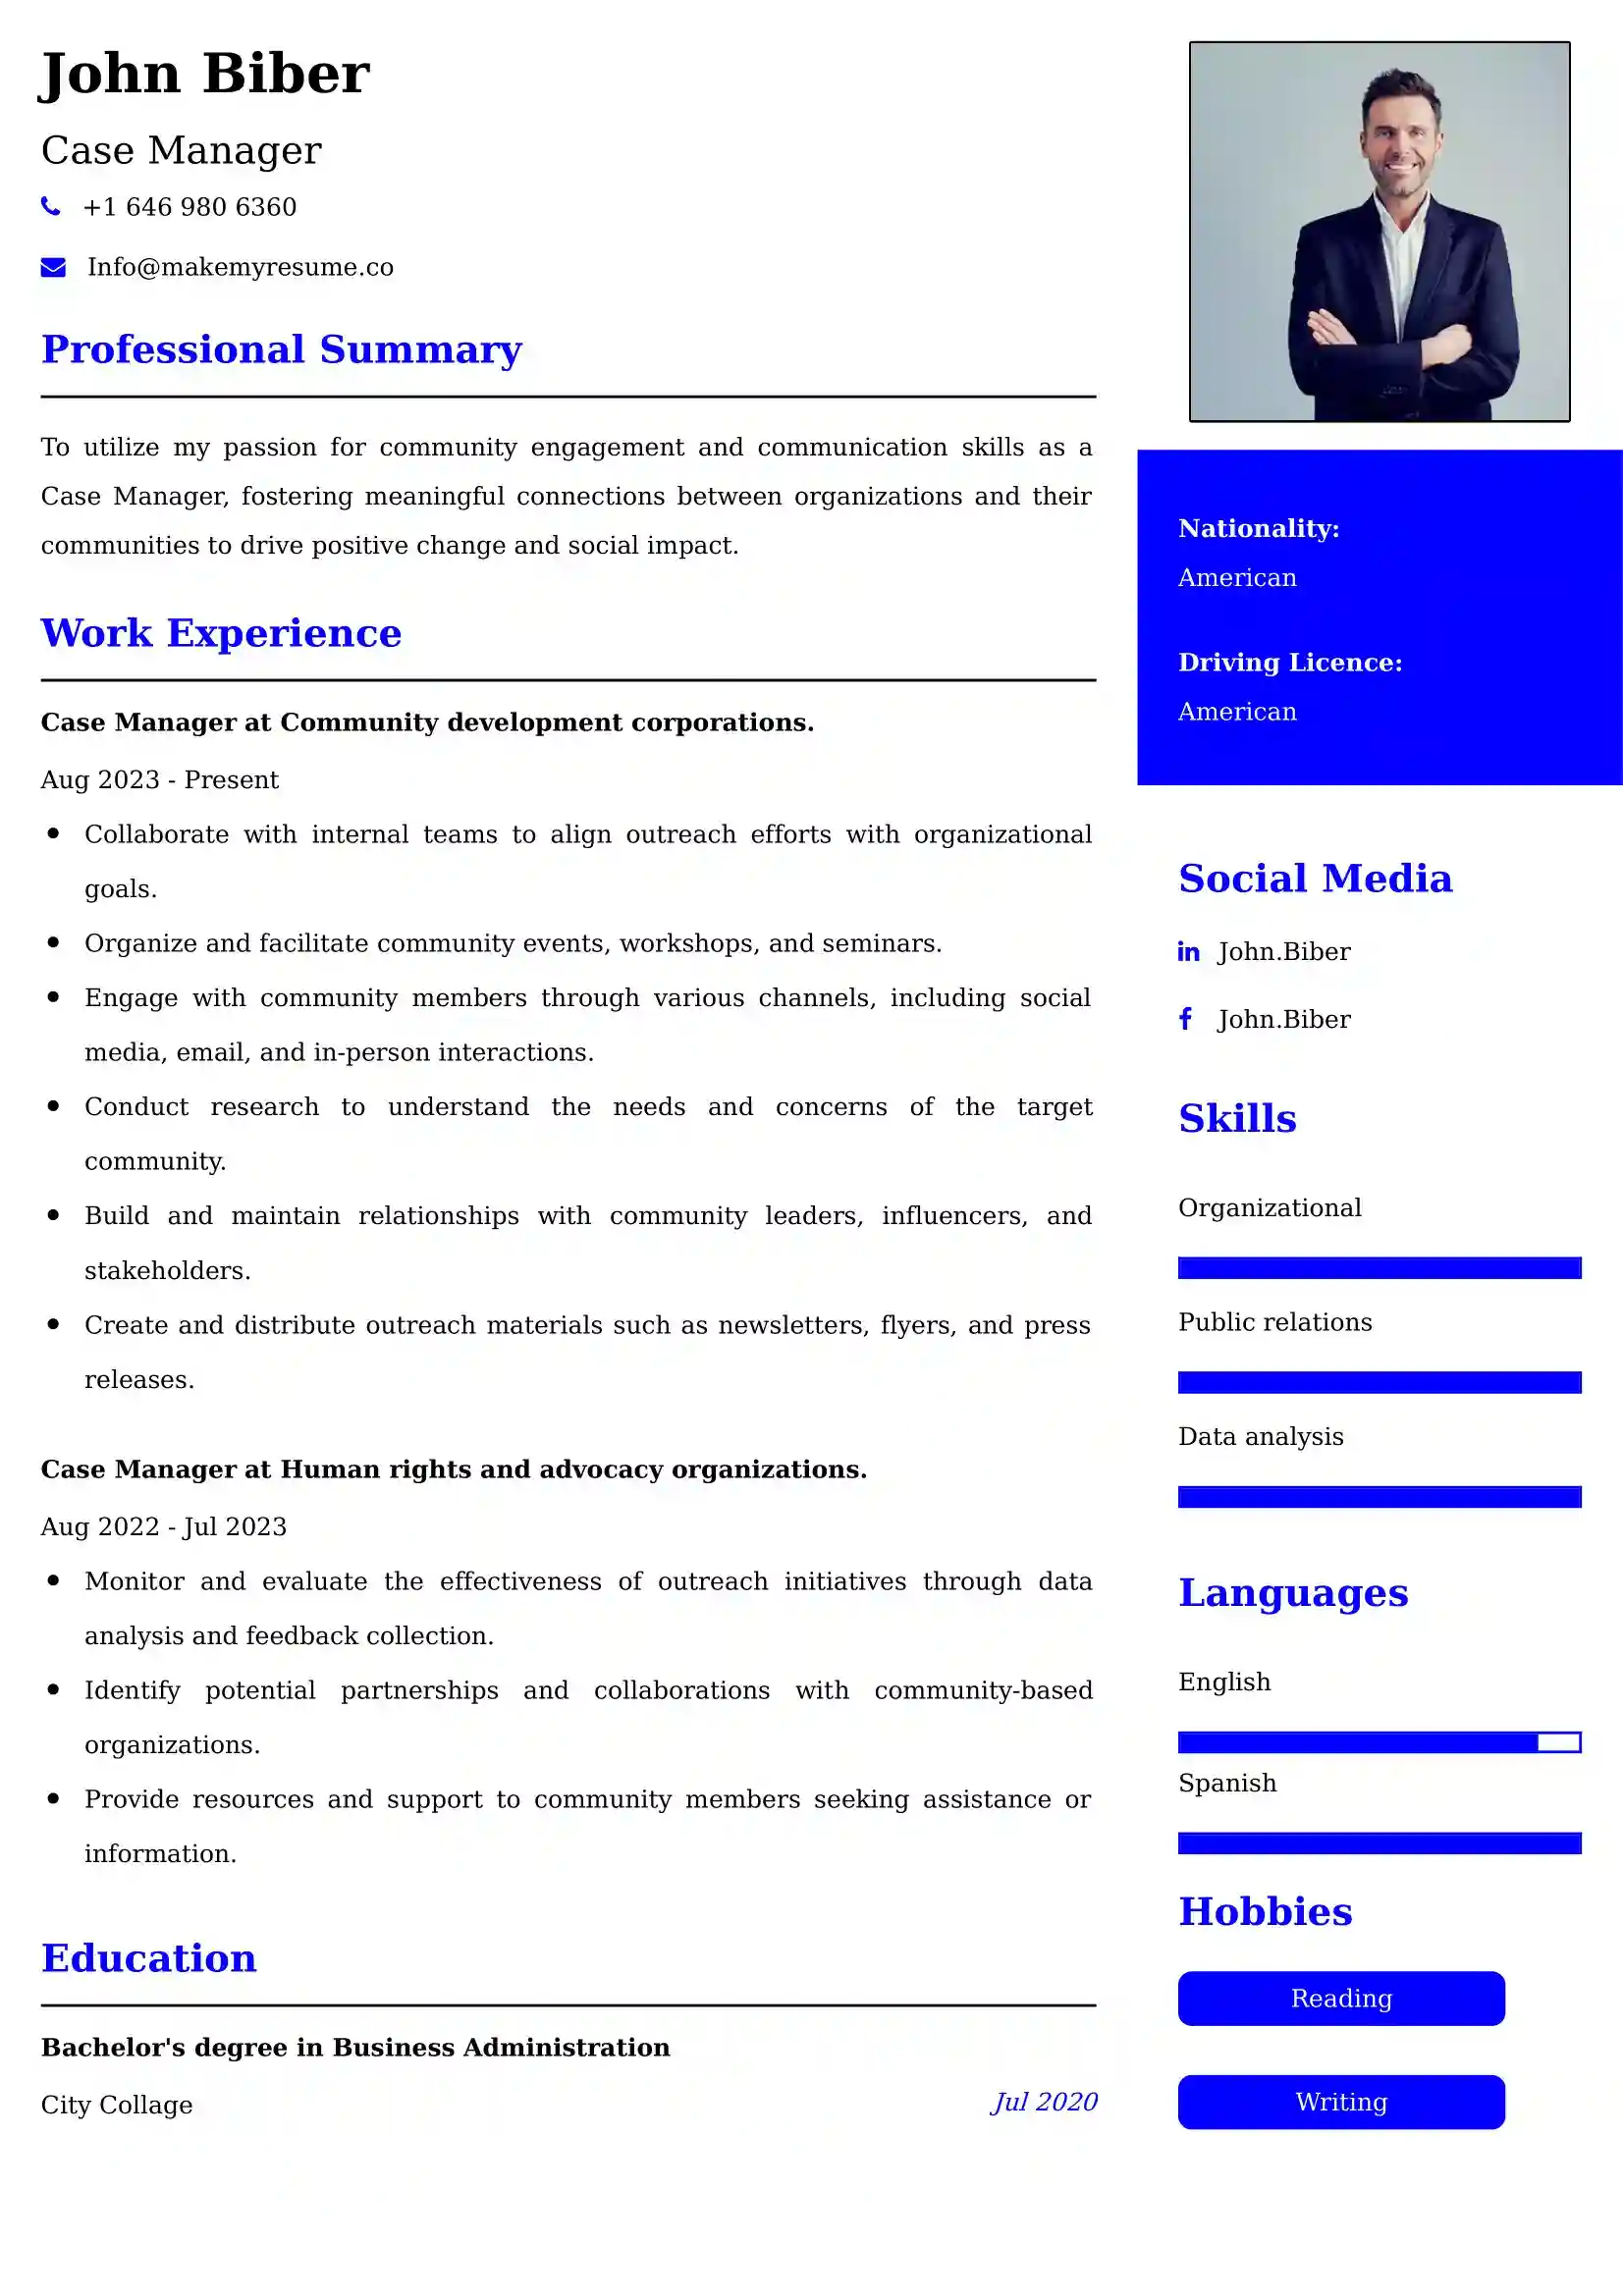 Best Case Manager Resume Examples for UK